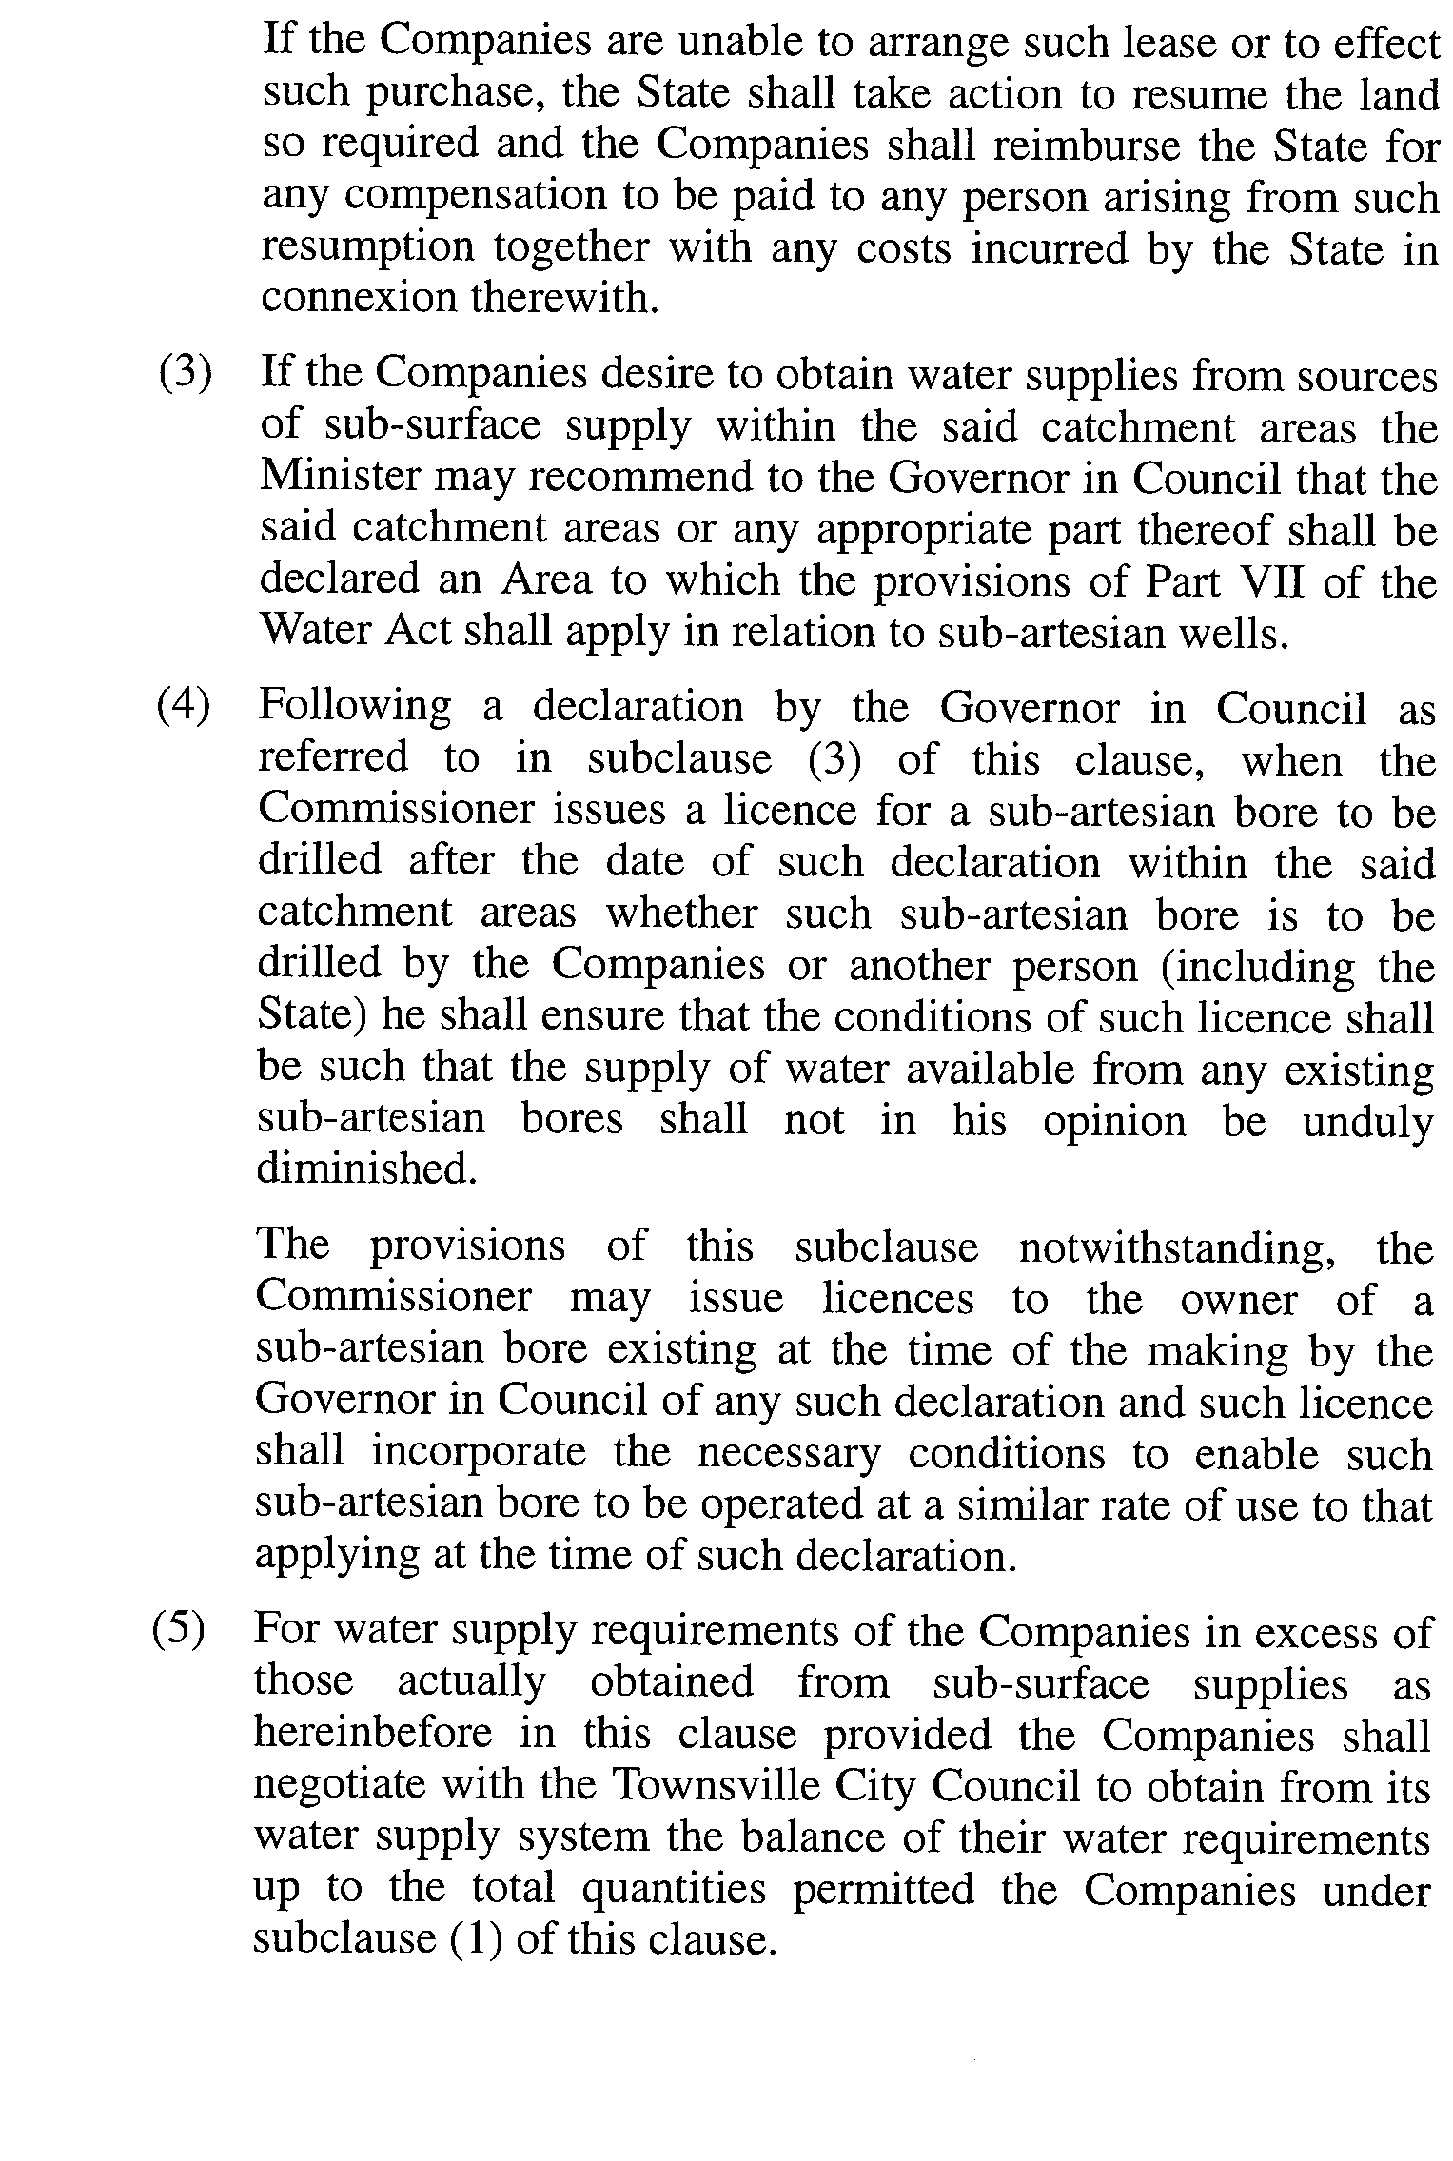 scan of agreement text